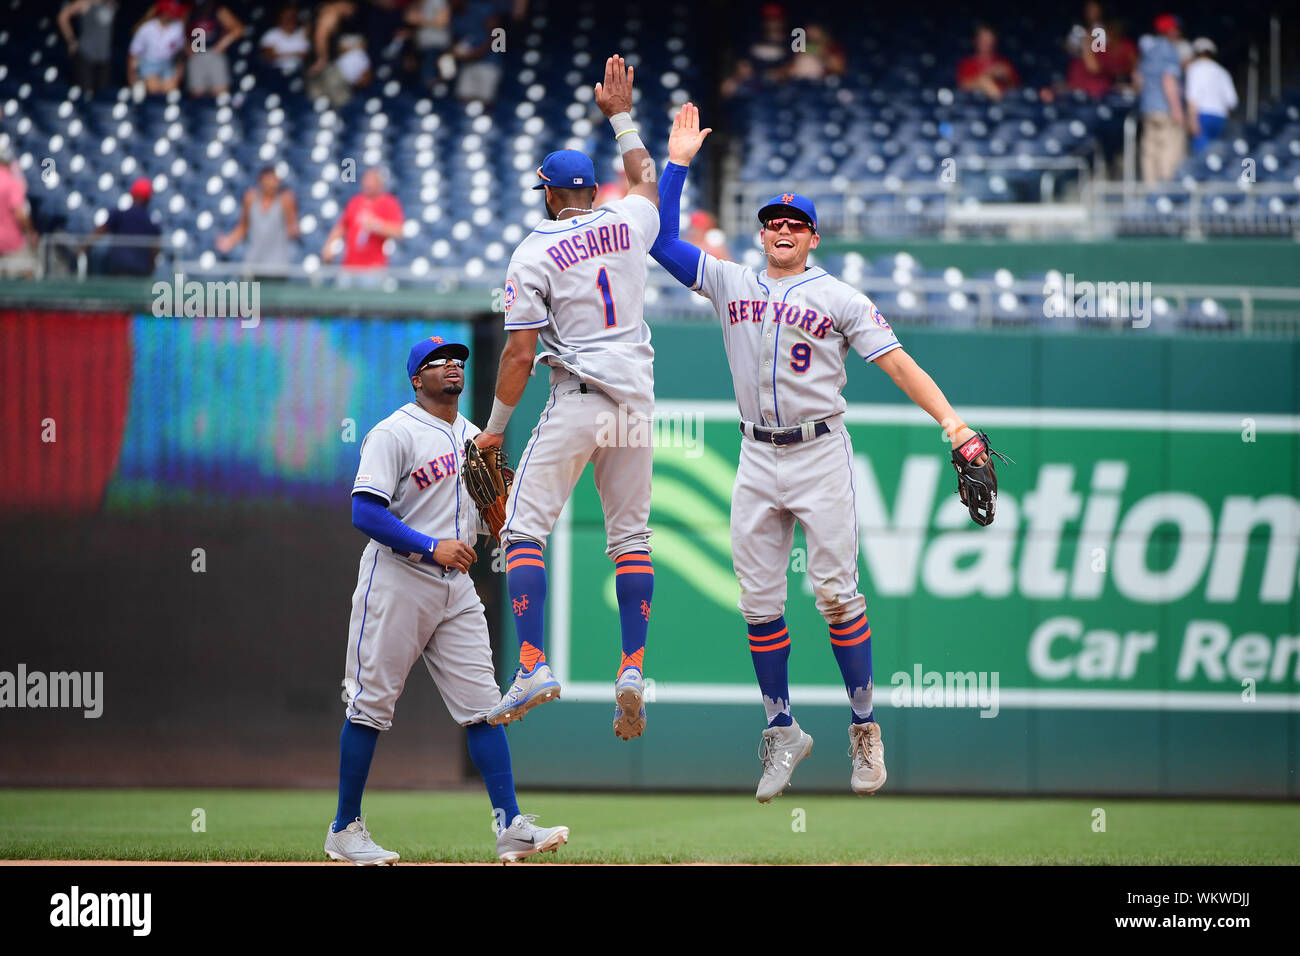 Washington, United States. 04th Sep, 2019. New York Mets shortstop Amed Rosario (1) celebrates with teammate Brandon Nimmo after the Mets defeated the Washington Nationals 8-4 at National Park in Washington, DC on Wednesday, September 4, 2019. Photo by Kevin Dietsch/UPI Credit: UPI/Alamy Live News Stock Photo